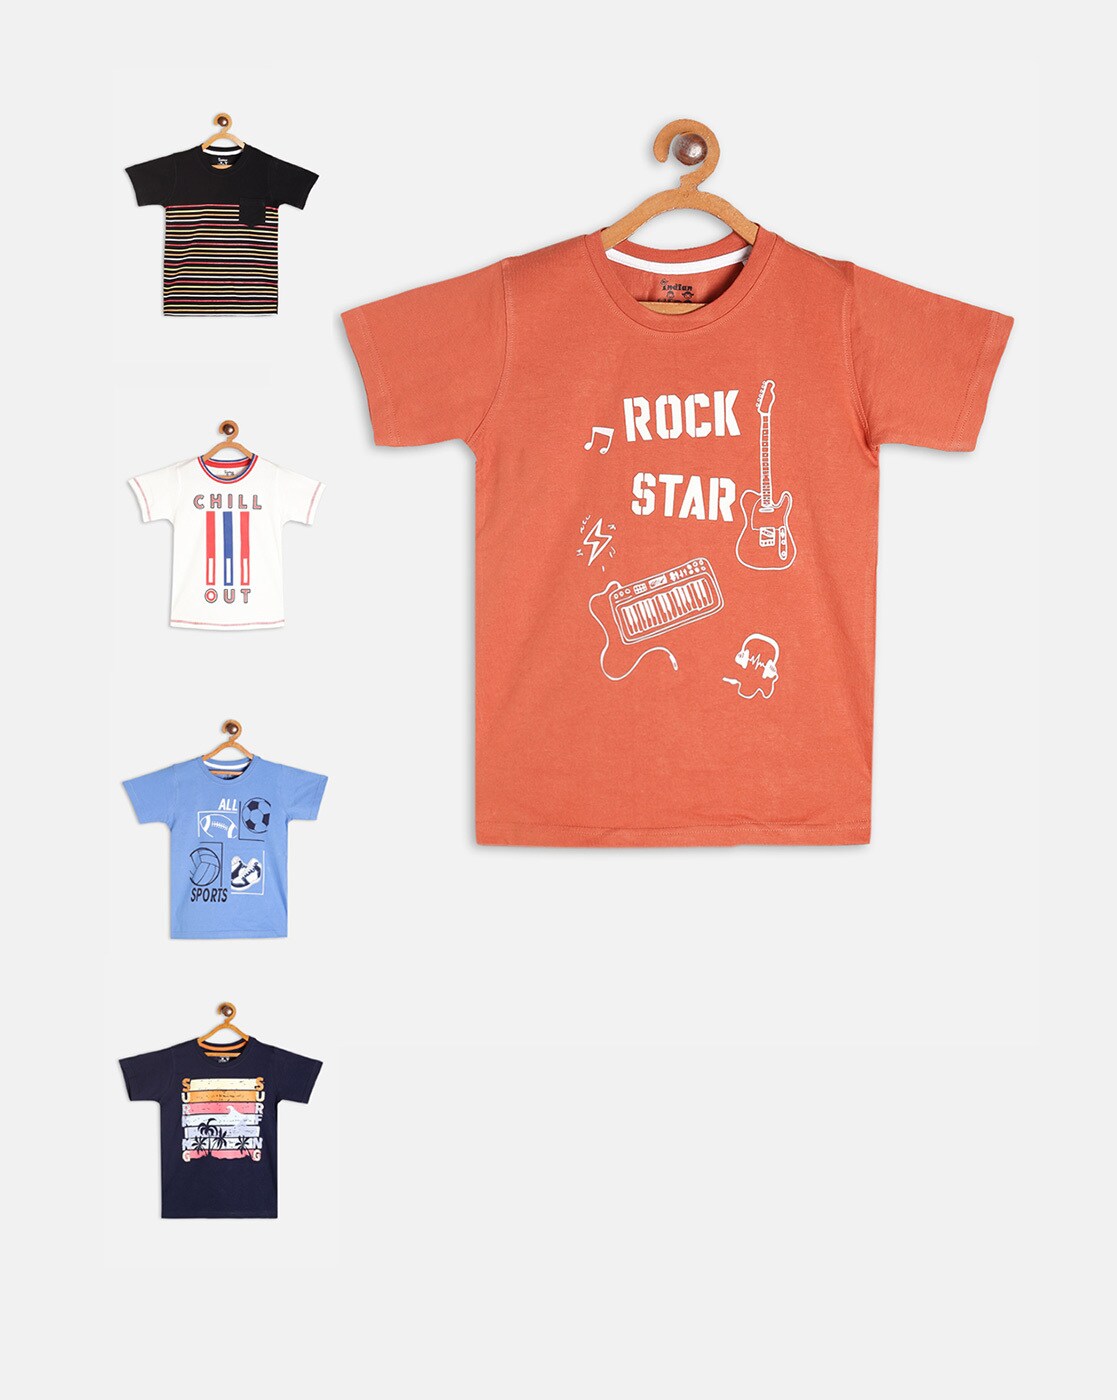 All Star T Shirts - Buy All Star T Shirts online in India